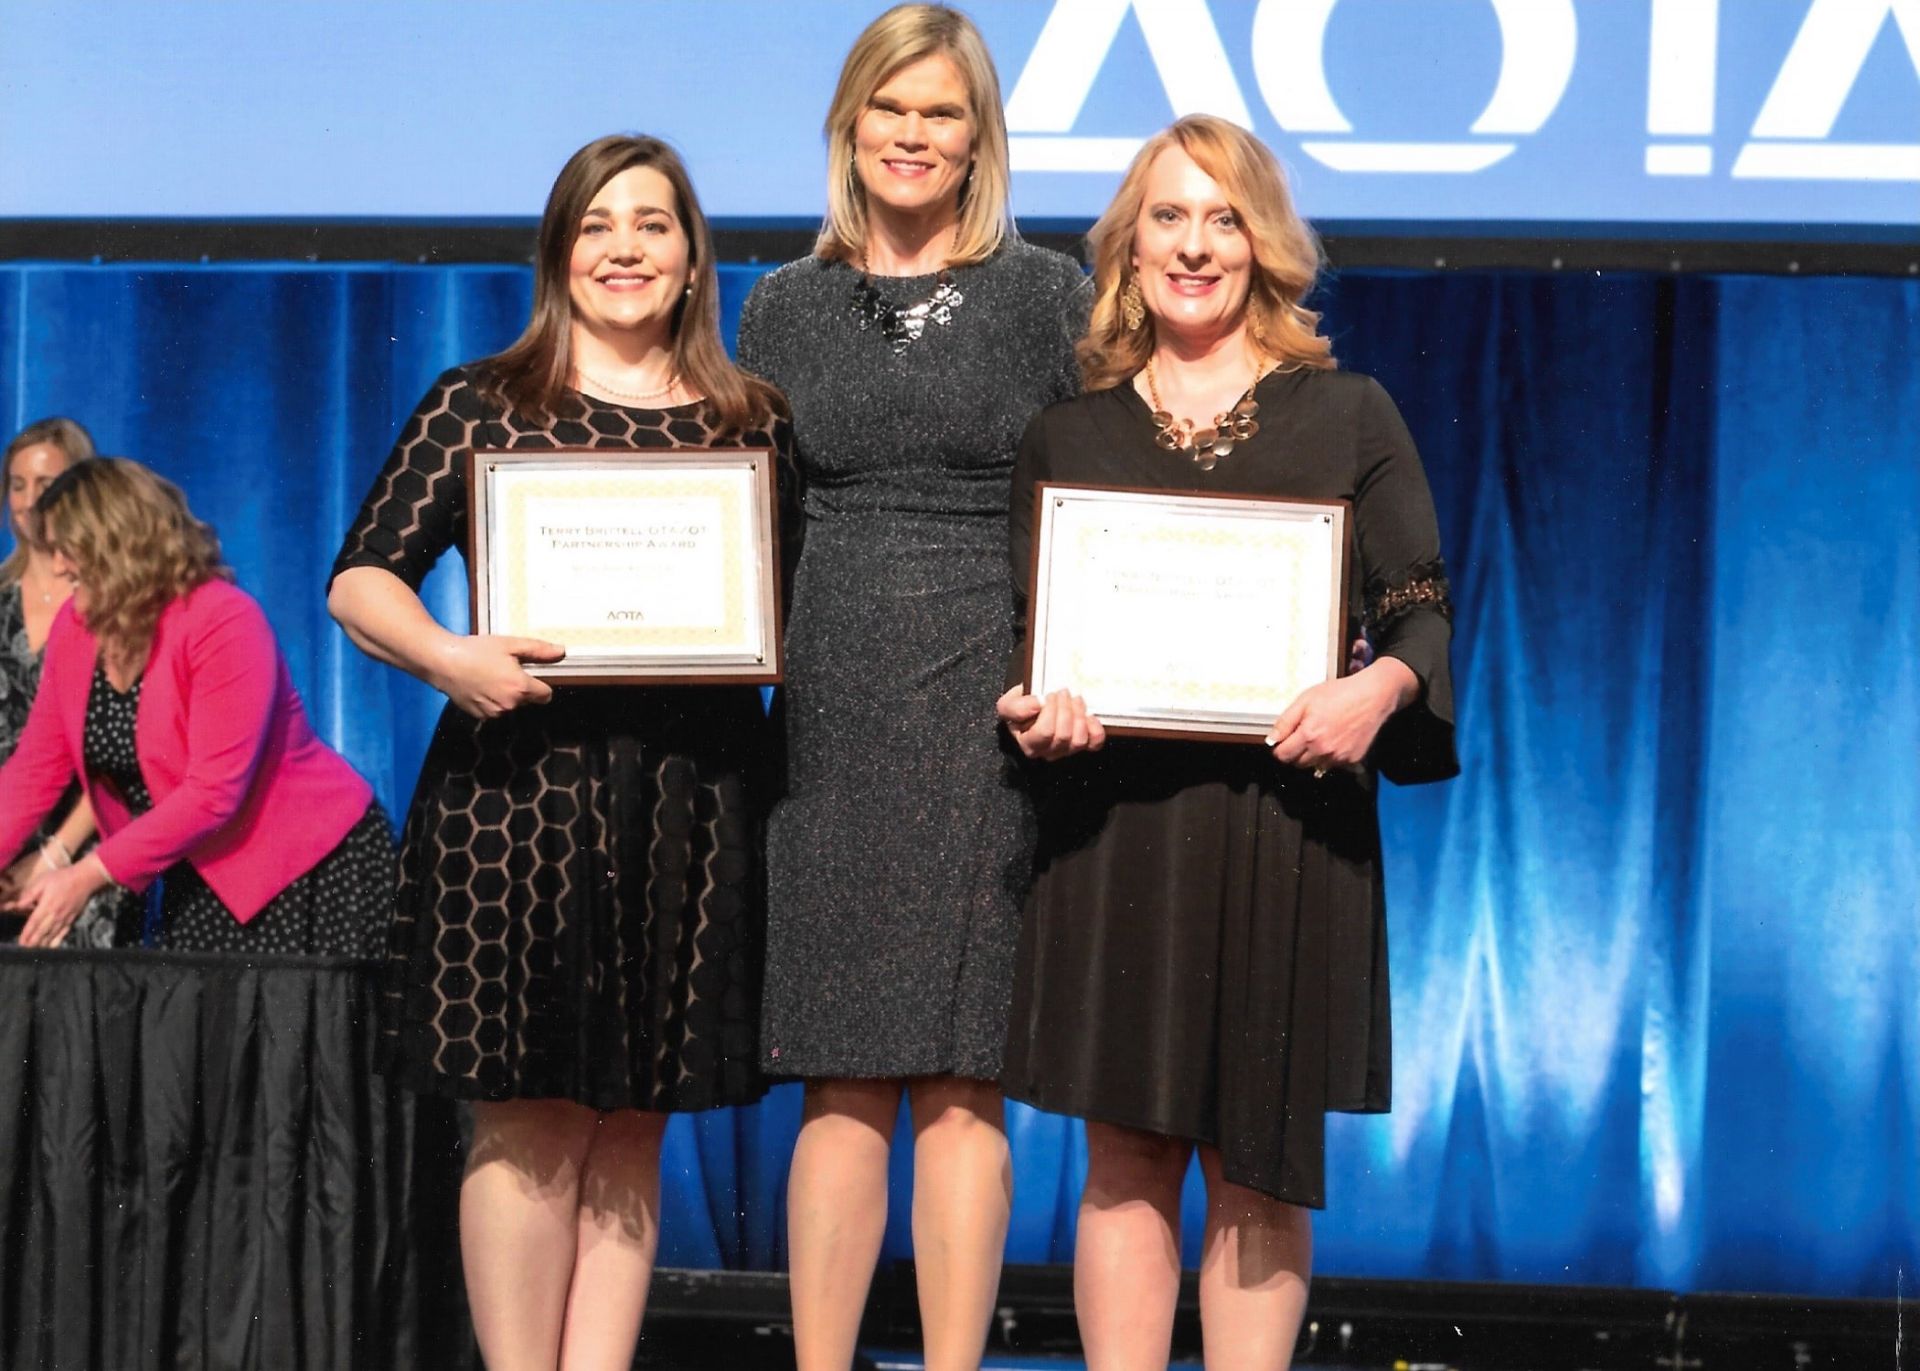 photo Niccole Rowe and Kimberly Breeden accepting AOTA award in 2018